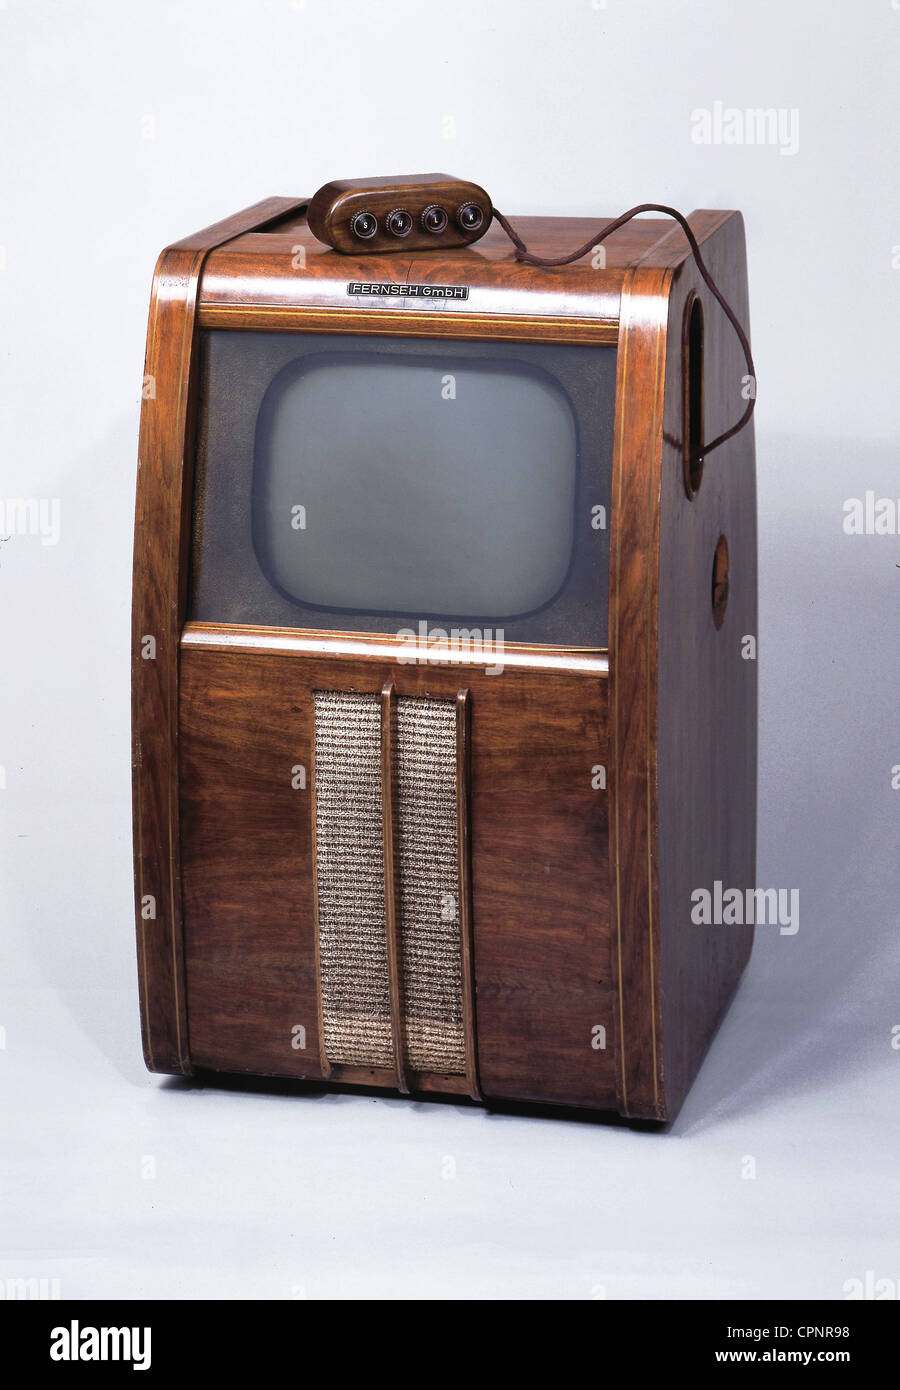 broadcast,television,standalone television set of the Fernseh GmbH,DE 10,with 40 centimeter screen size,remote control with cable,one of the first German postwar television sets,original price 1951: circa DM 2.500,Germany,1951,television console,television cabinet,cabinet receiver,standalone device,screen,screens,telescreen,monochrome,cable remote control,TV remote control,television set,TV,television sets,TV sets,TVs,TV set,TV history,media history,50s,television furniture,piece of furniture,pieces of furniture,wooden chassis,w,Additional-Rights-Clearences-Not Available Stock Photo